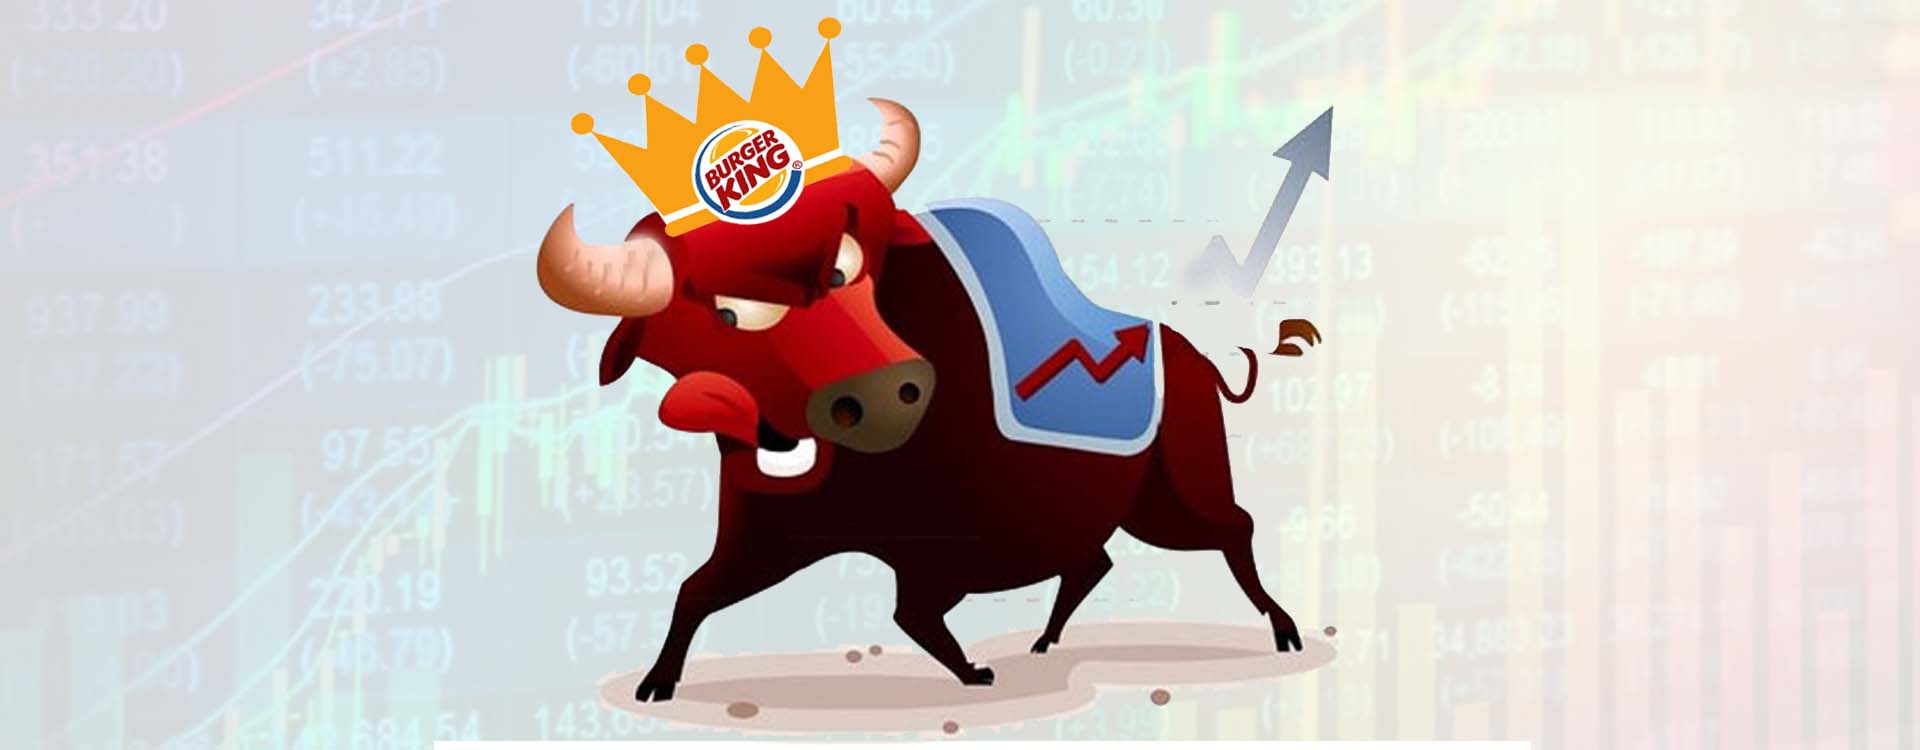 Burger King is emerging to be bull in the stock market due to its expansion plans to be profitable.